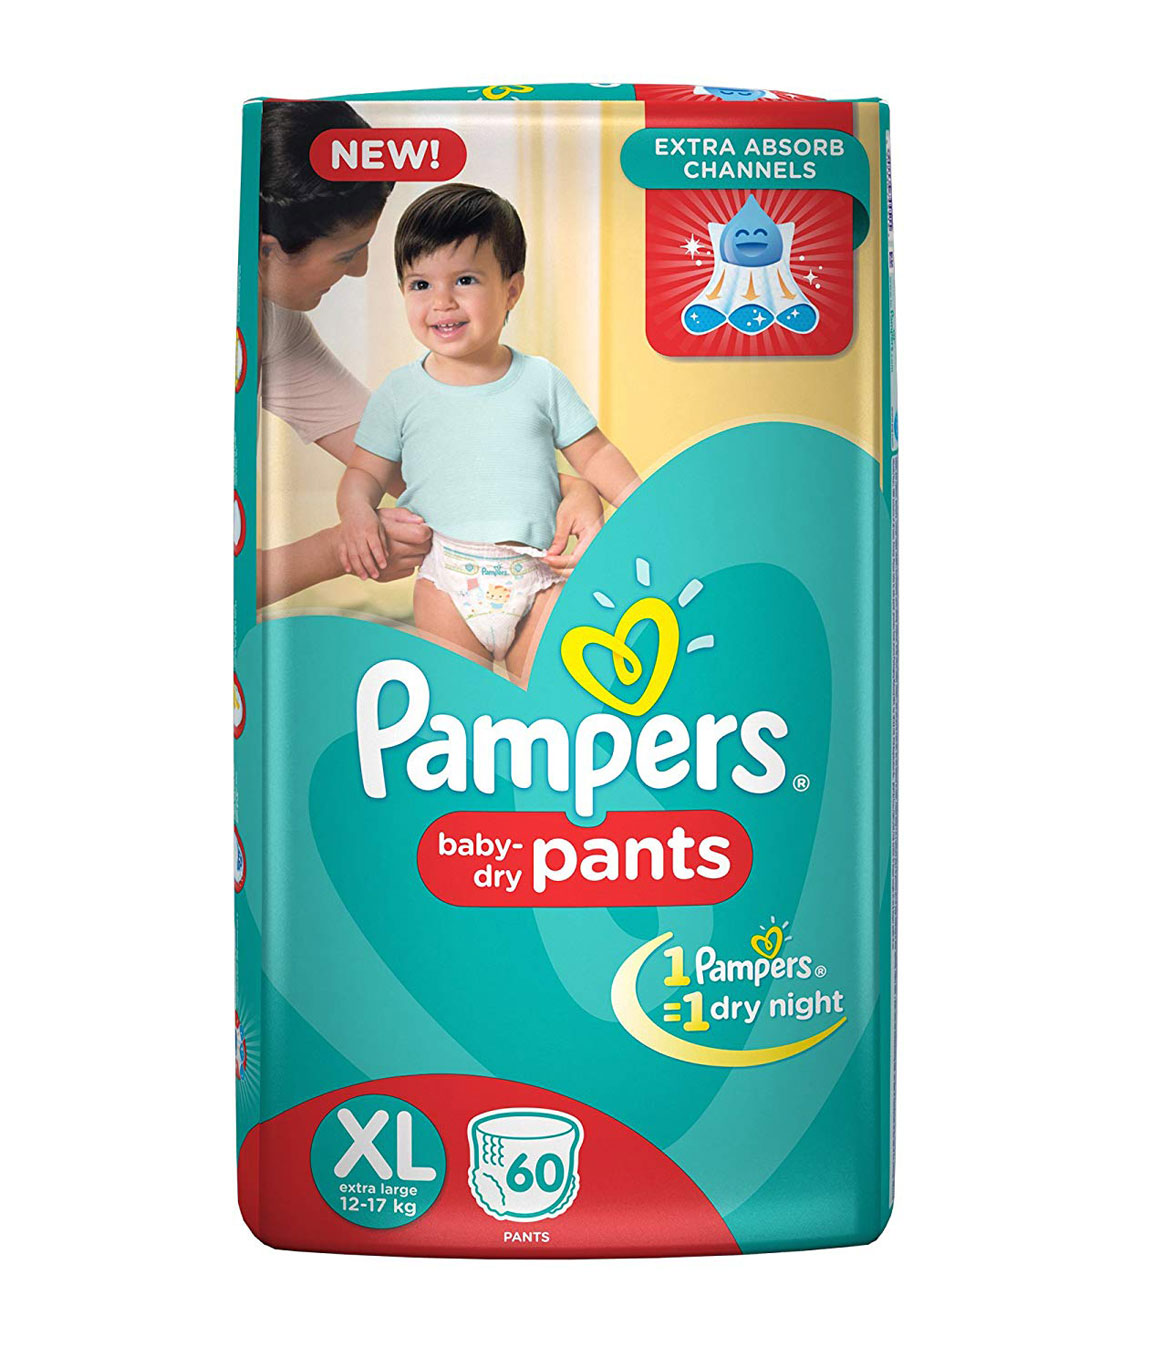 Pampers All Round Protection Pants, Extra Large Size Baby Diapers (XL) |  RichesM Healthcare